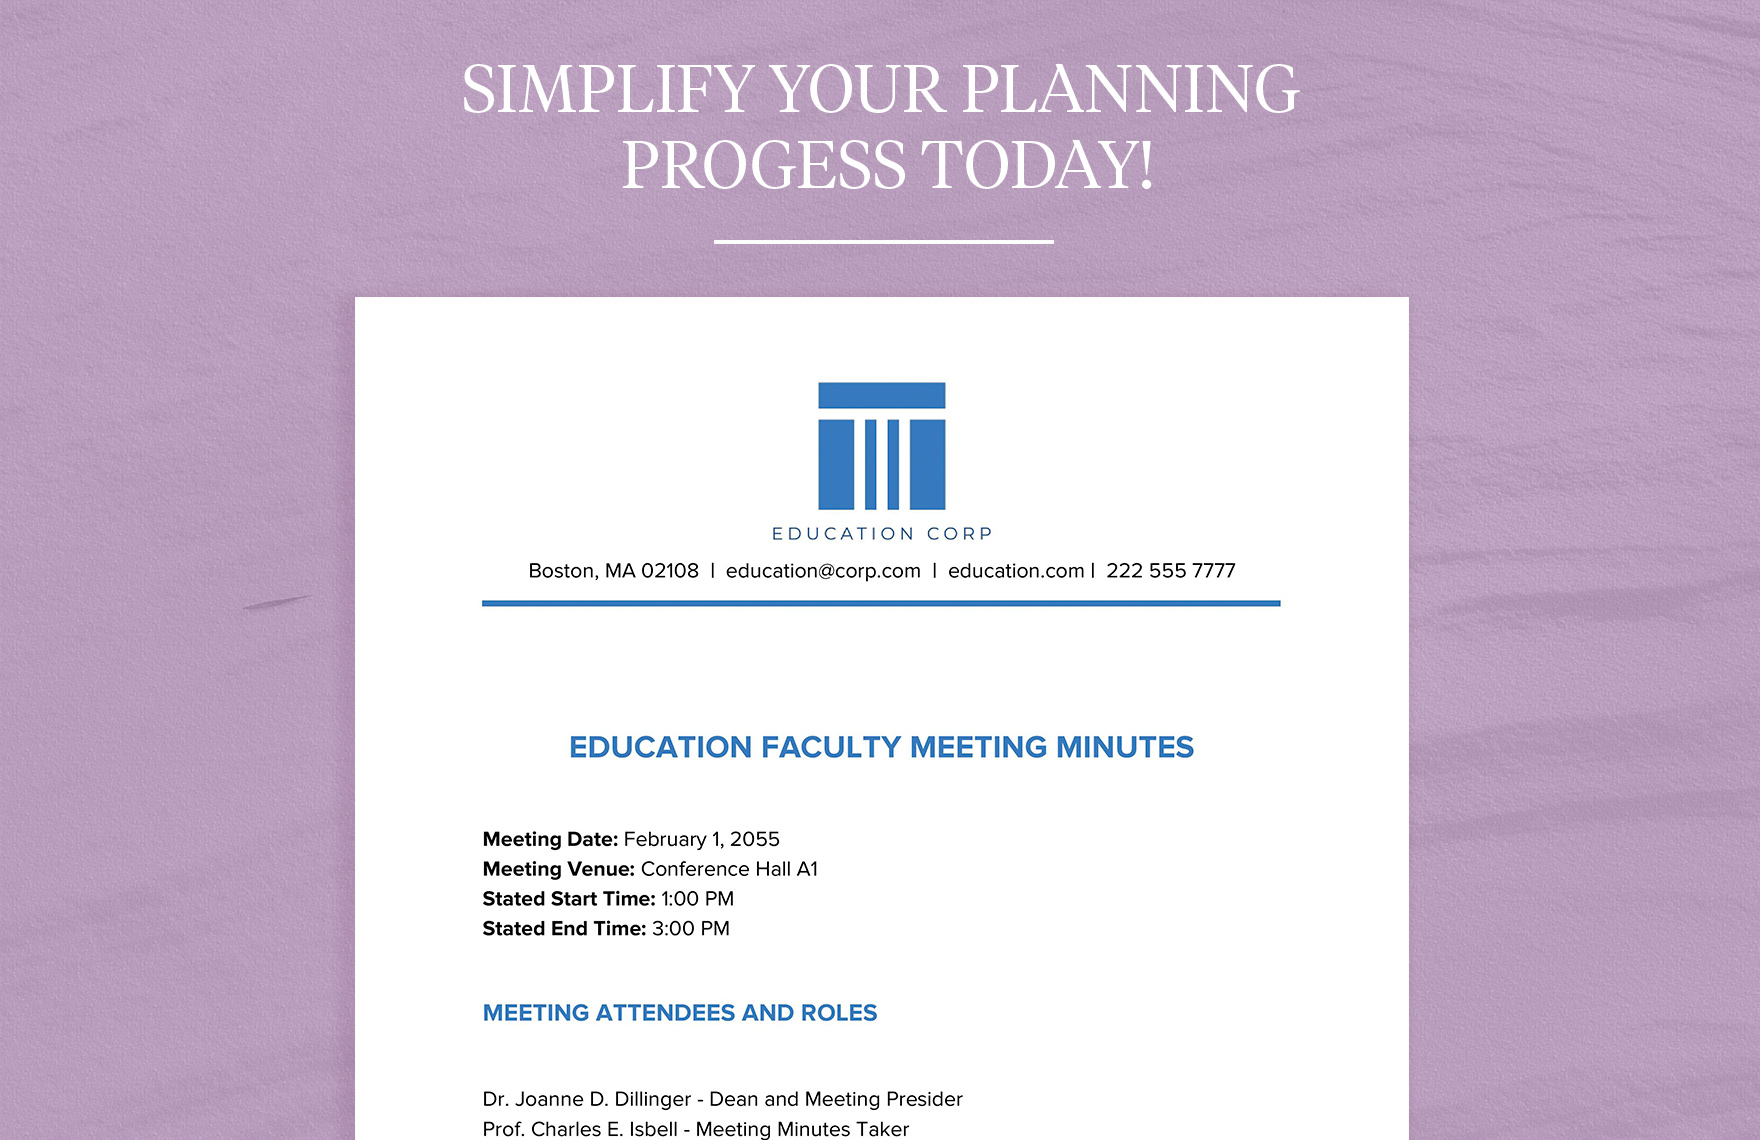 Education Faculty Meeting Minutes